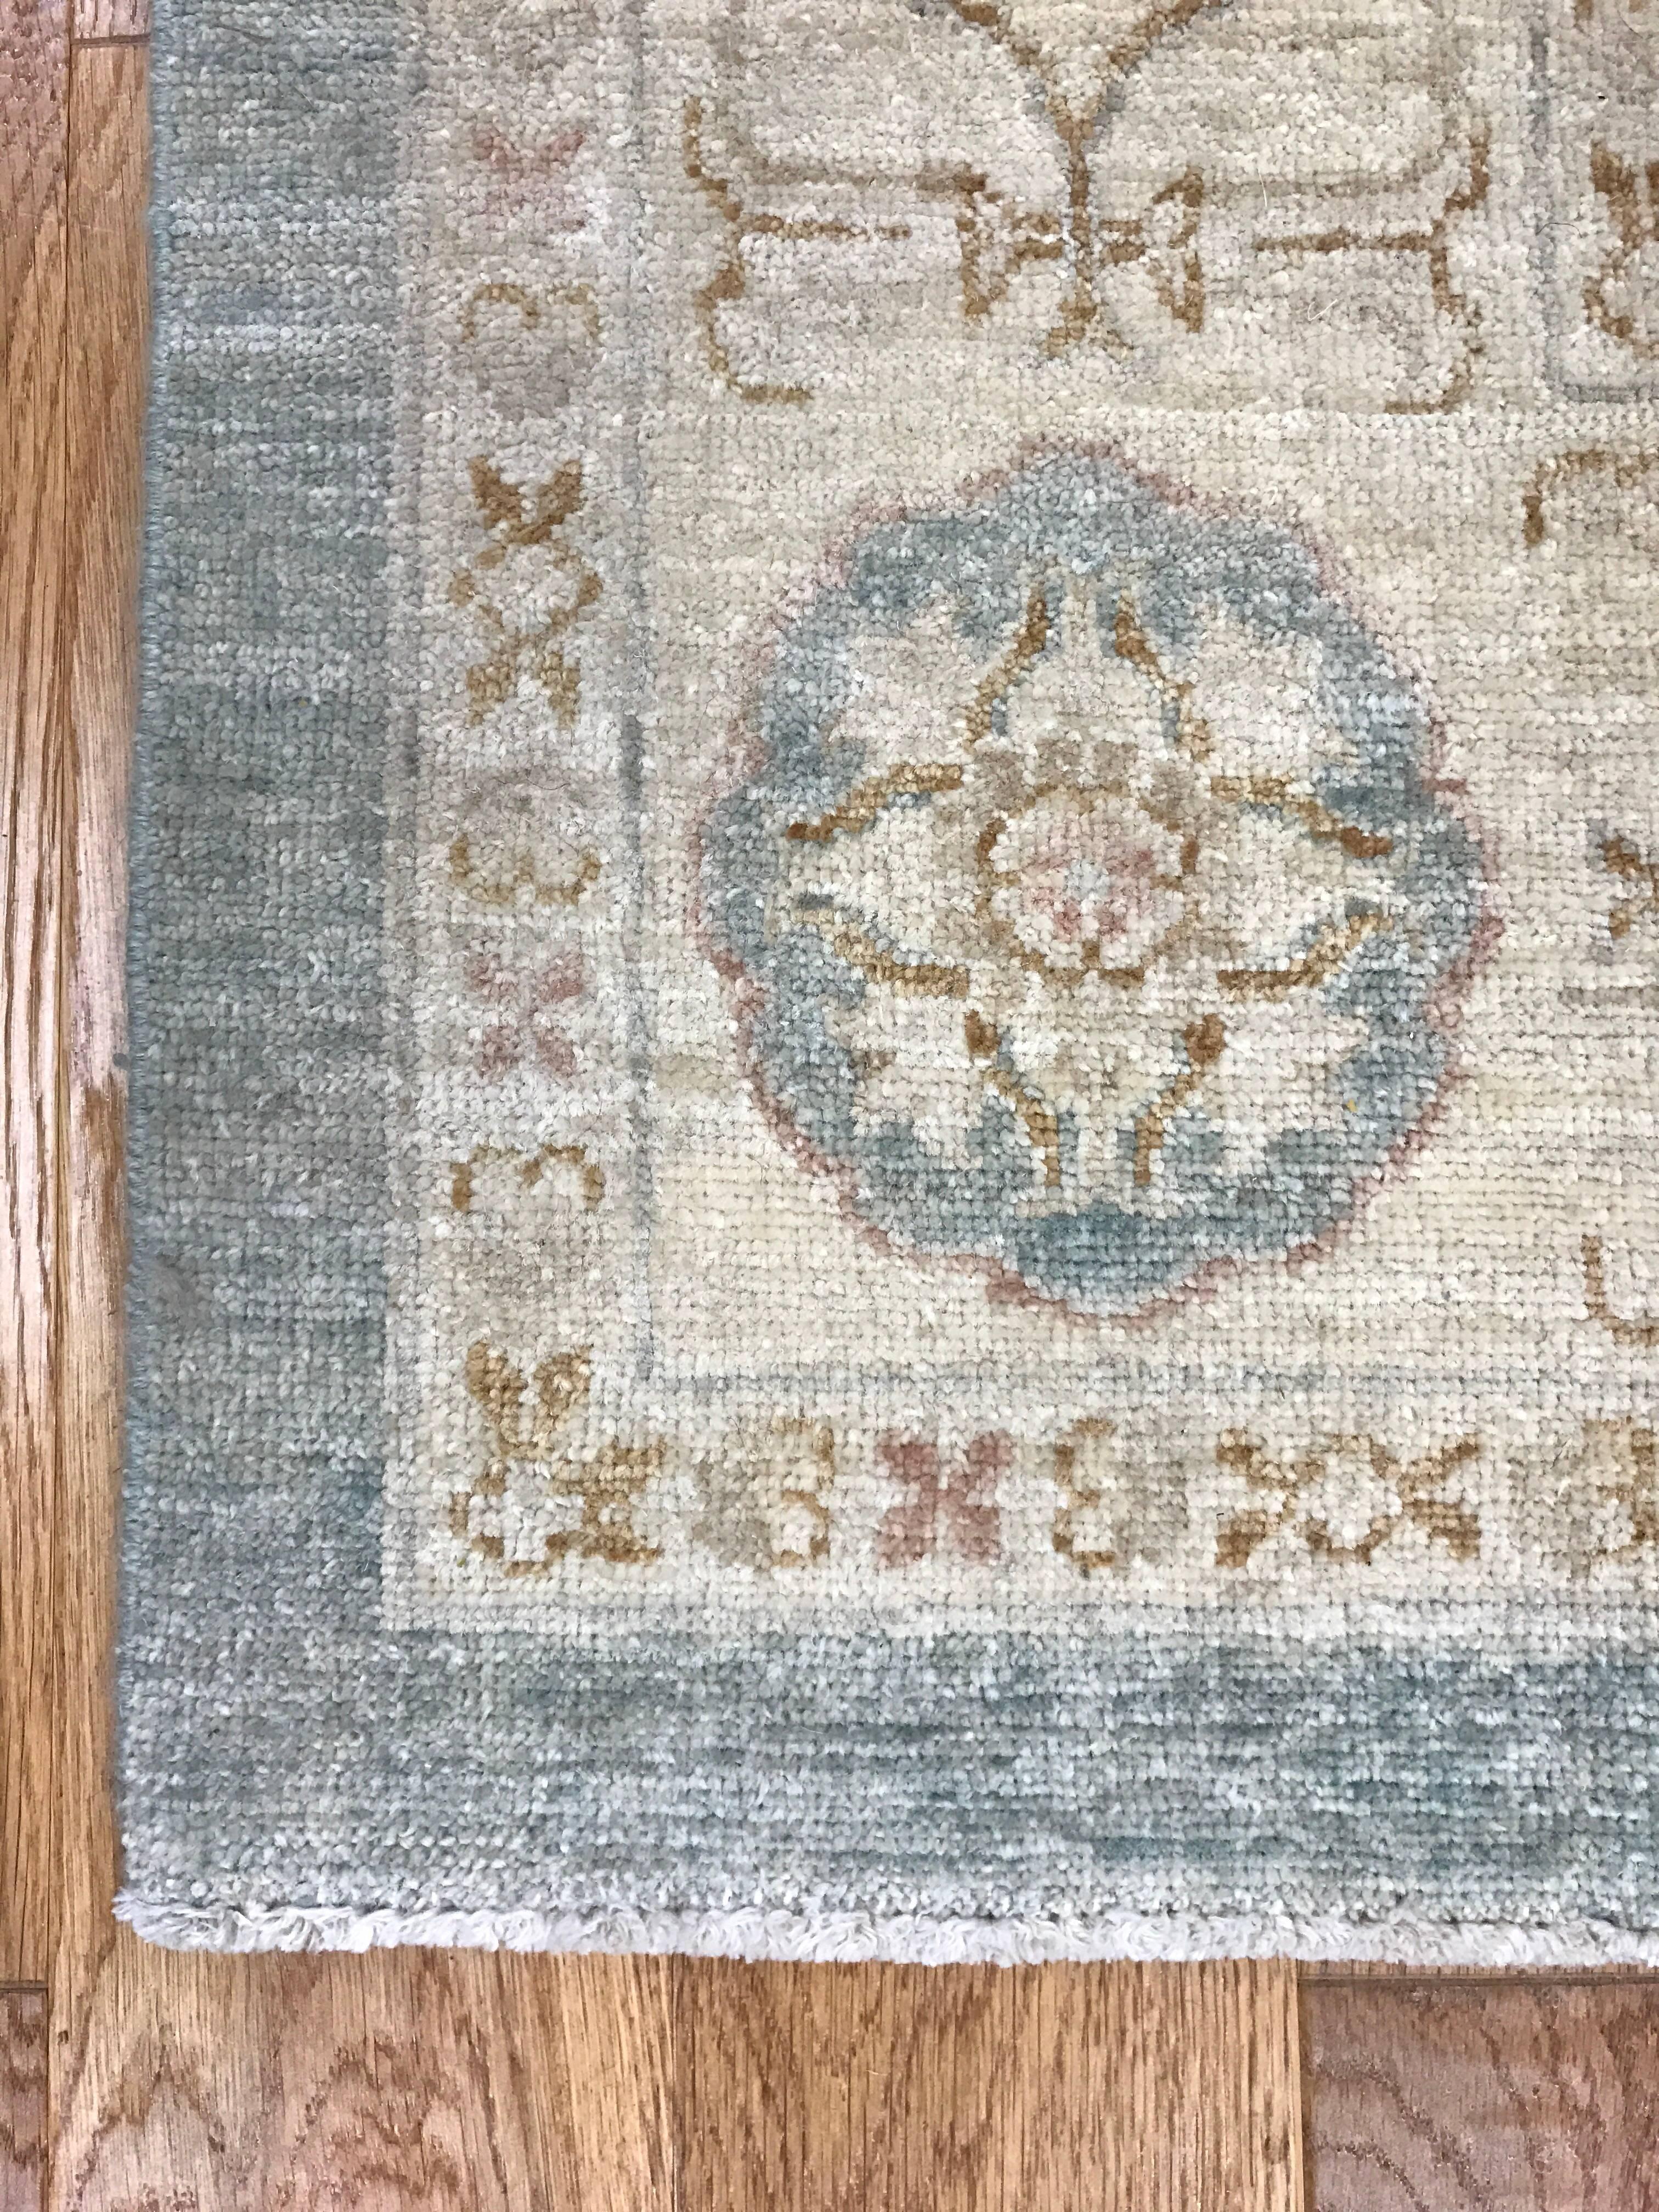 100% wood rug hand-knotted in Pakistan with muted tones of light blue and cream. In mint condition.
 